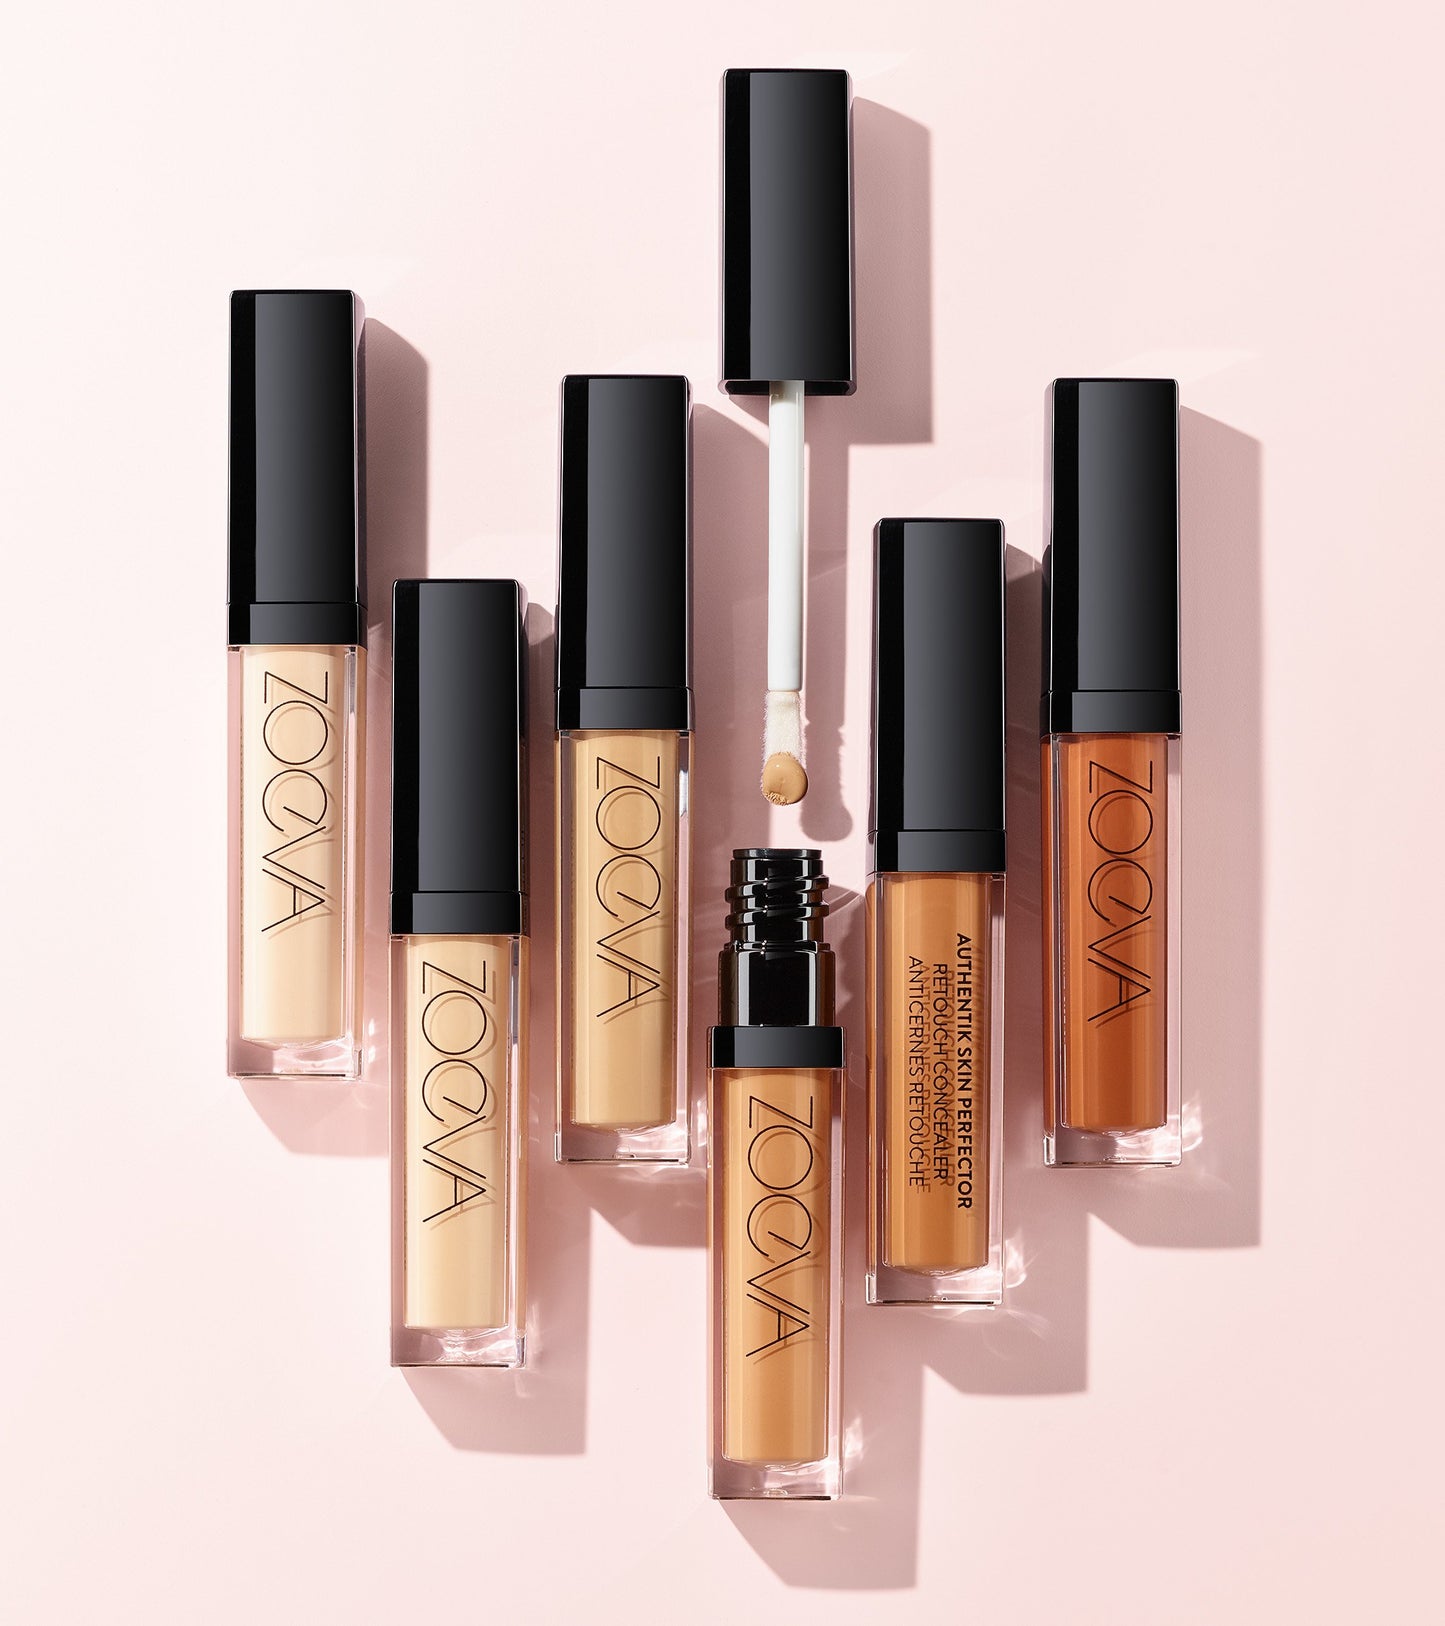 AUTHENTIK SKIN PERFECTOR CONCEALER (110 EMBODIED) Expanded Image 4